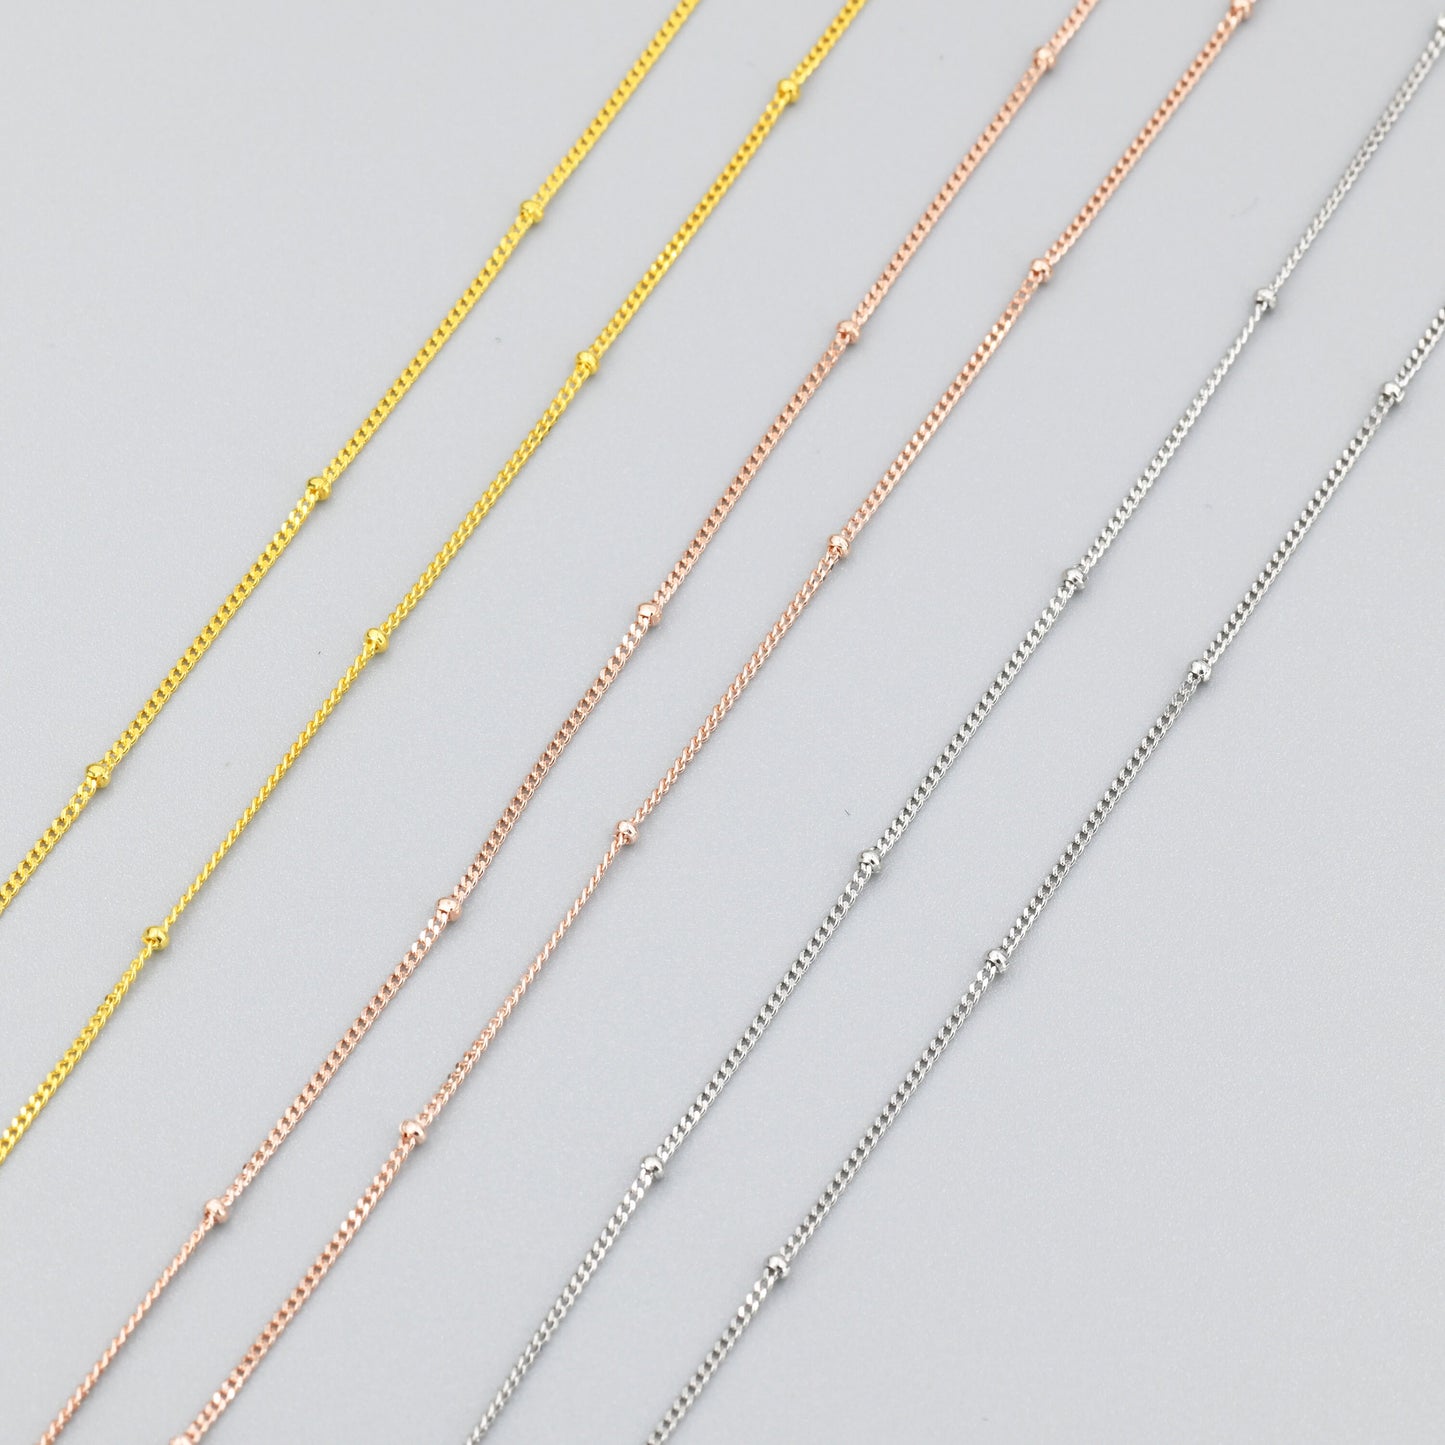 Minimalist Dainty Bead Motif Necklace in Sterling Silver, Various Lengths, Silver or Gold or Rose Gold, Satellite Chain Bead Choker Necklace